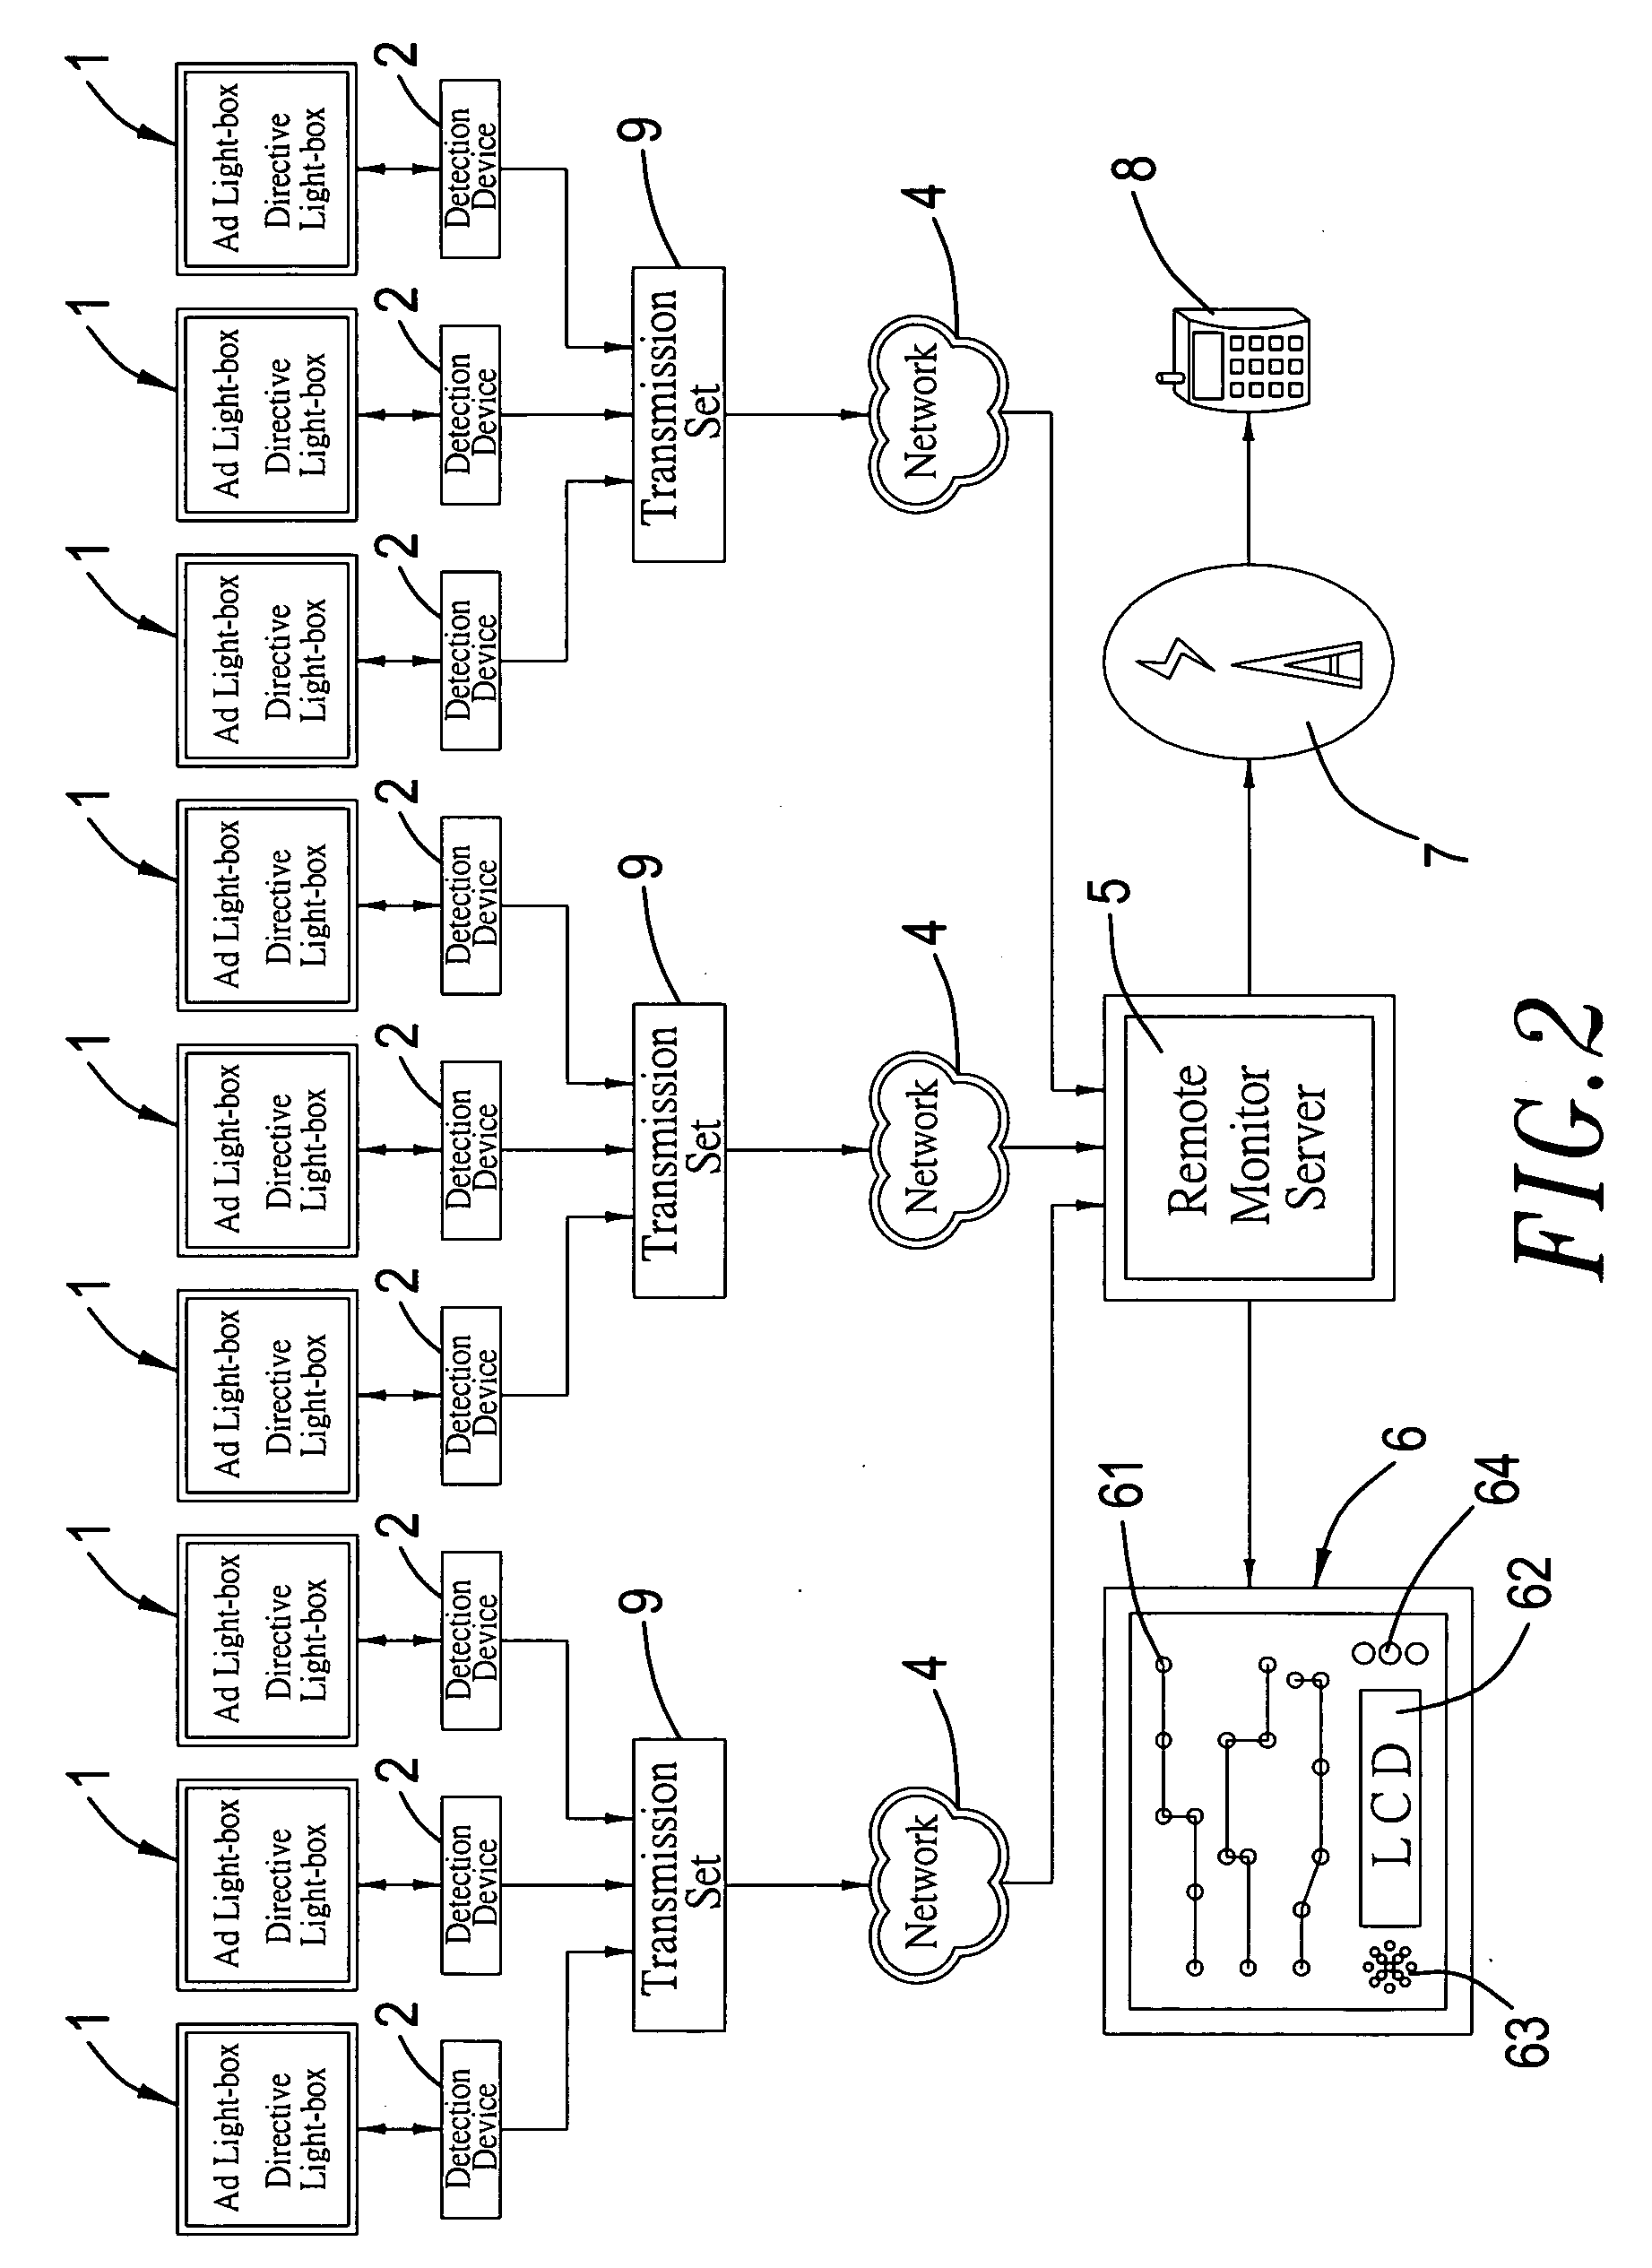 Advertising light-box network system with auto-detection and auto-monitor